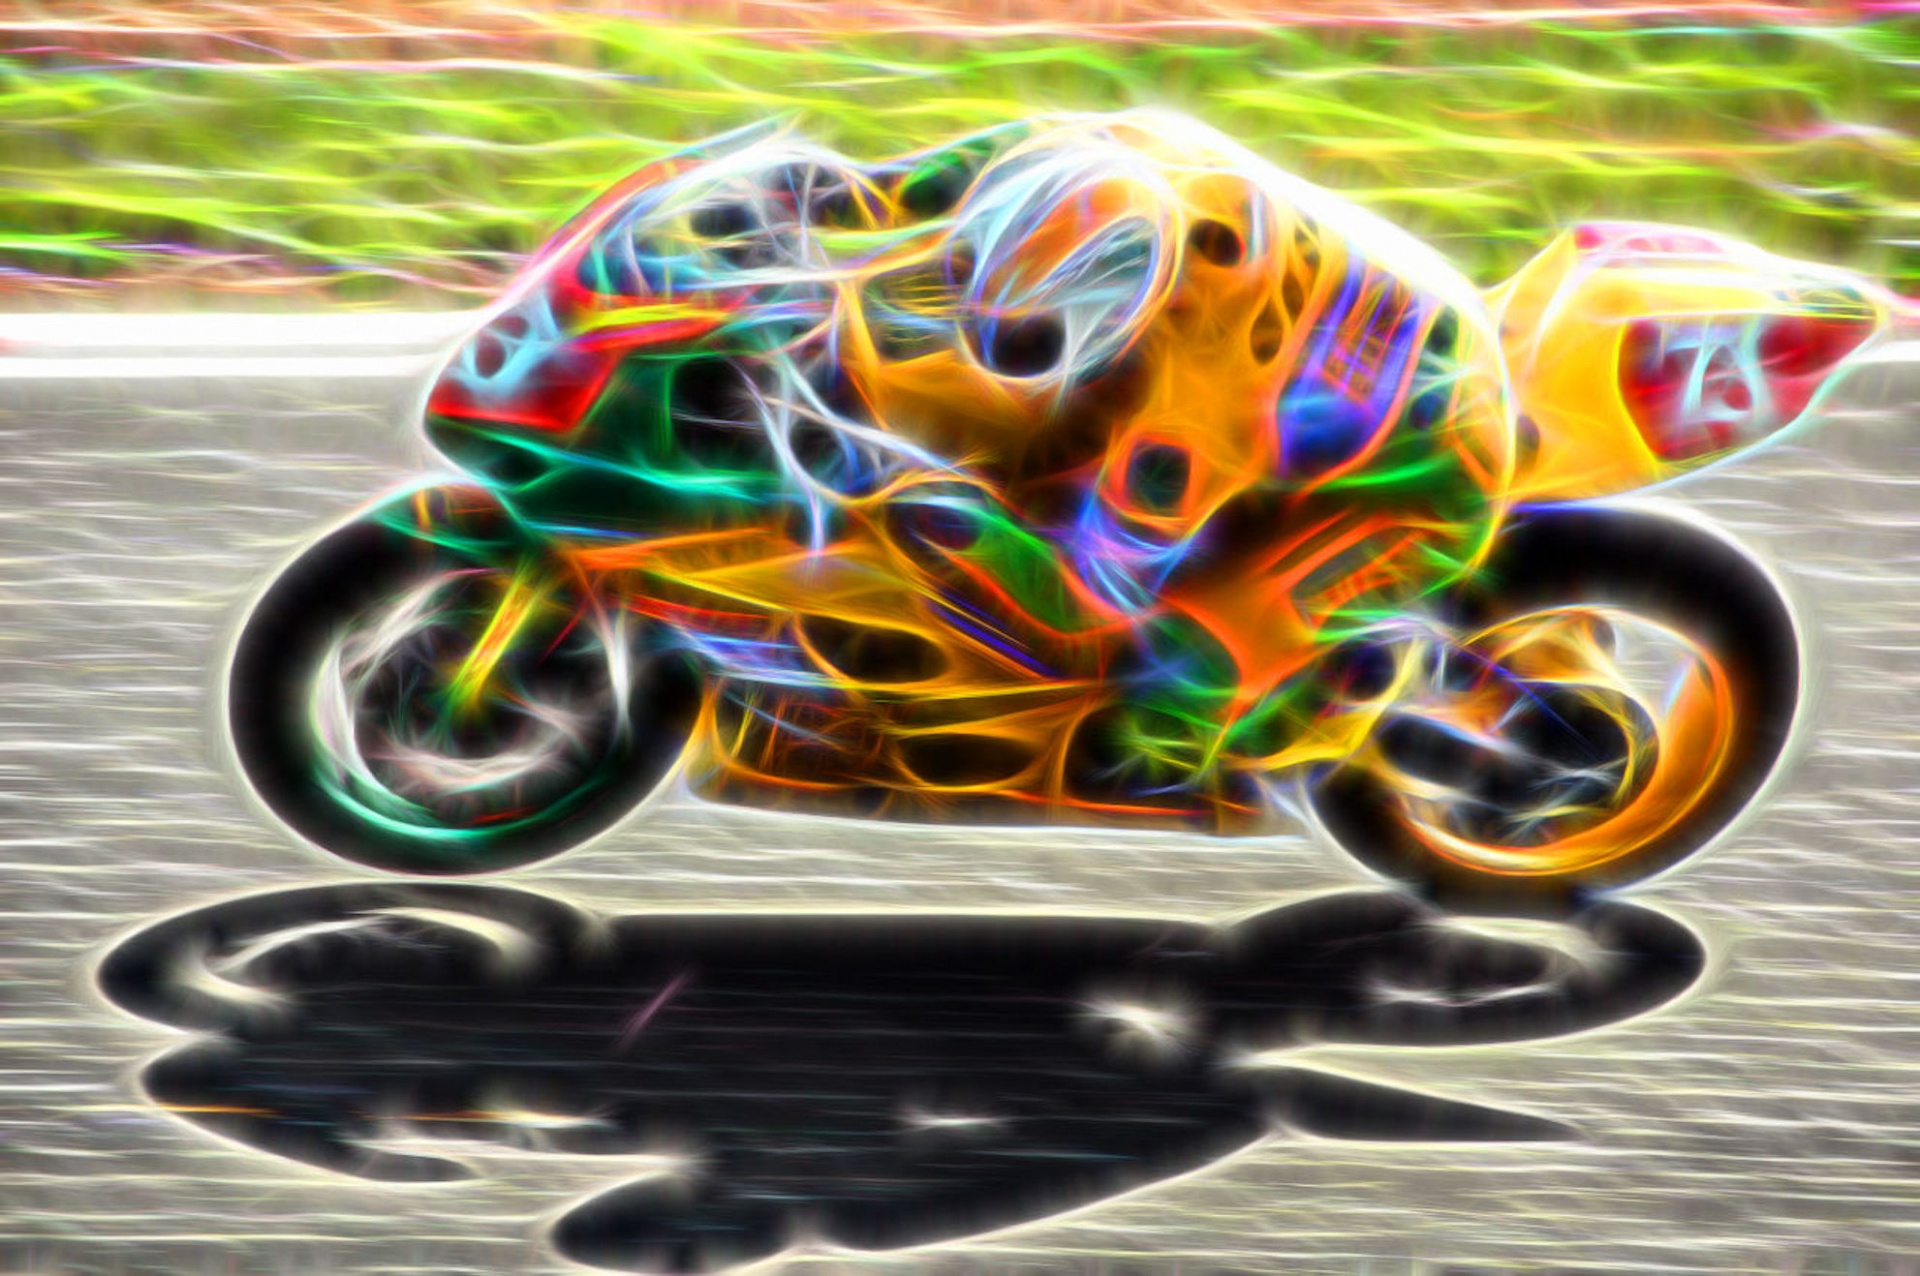 Background Wallpaper Motorcycle